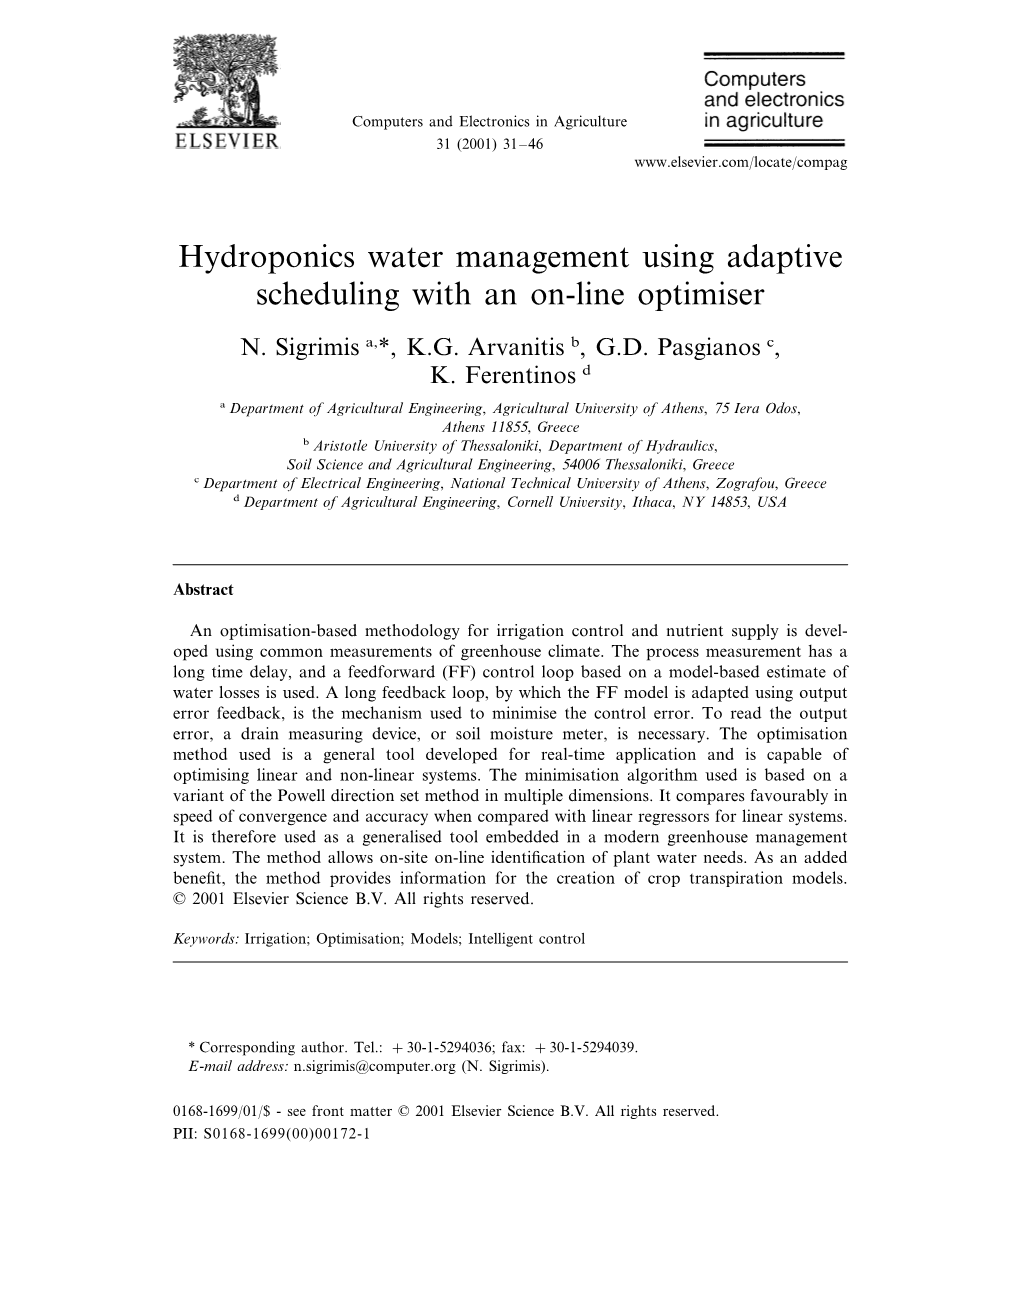 Hydroponics Water Management Using Adaptive Scheduling with an On-Line Optimiser